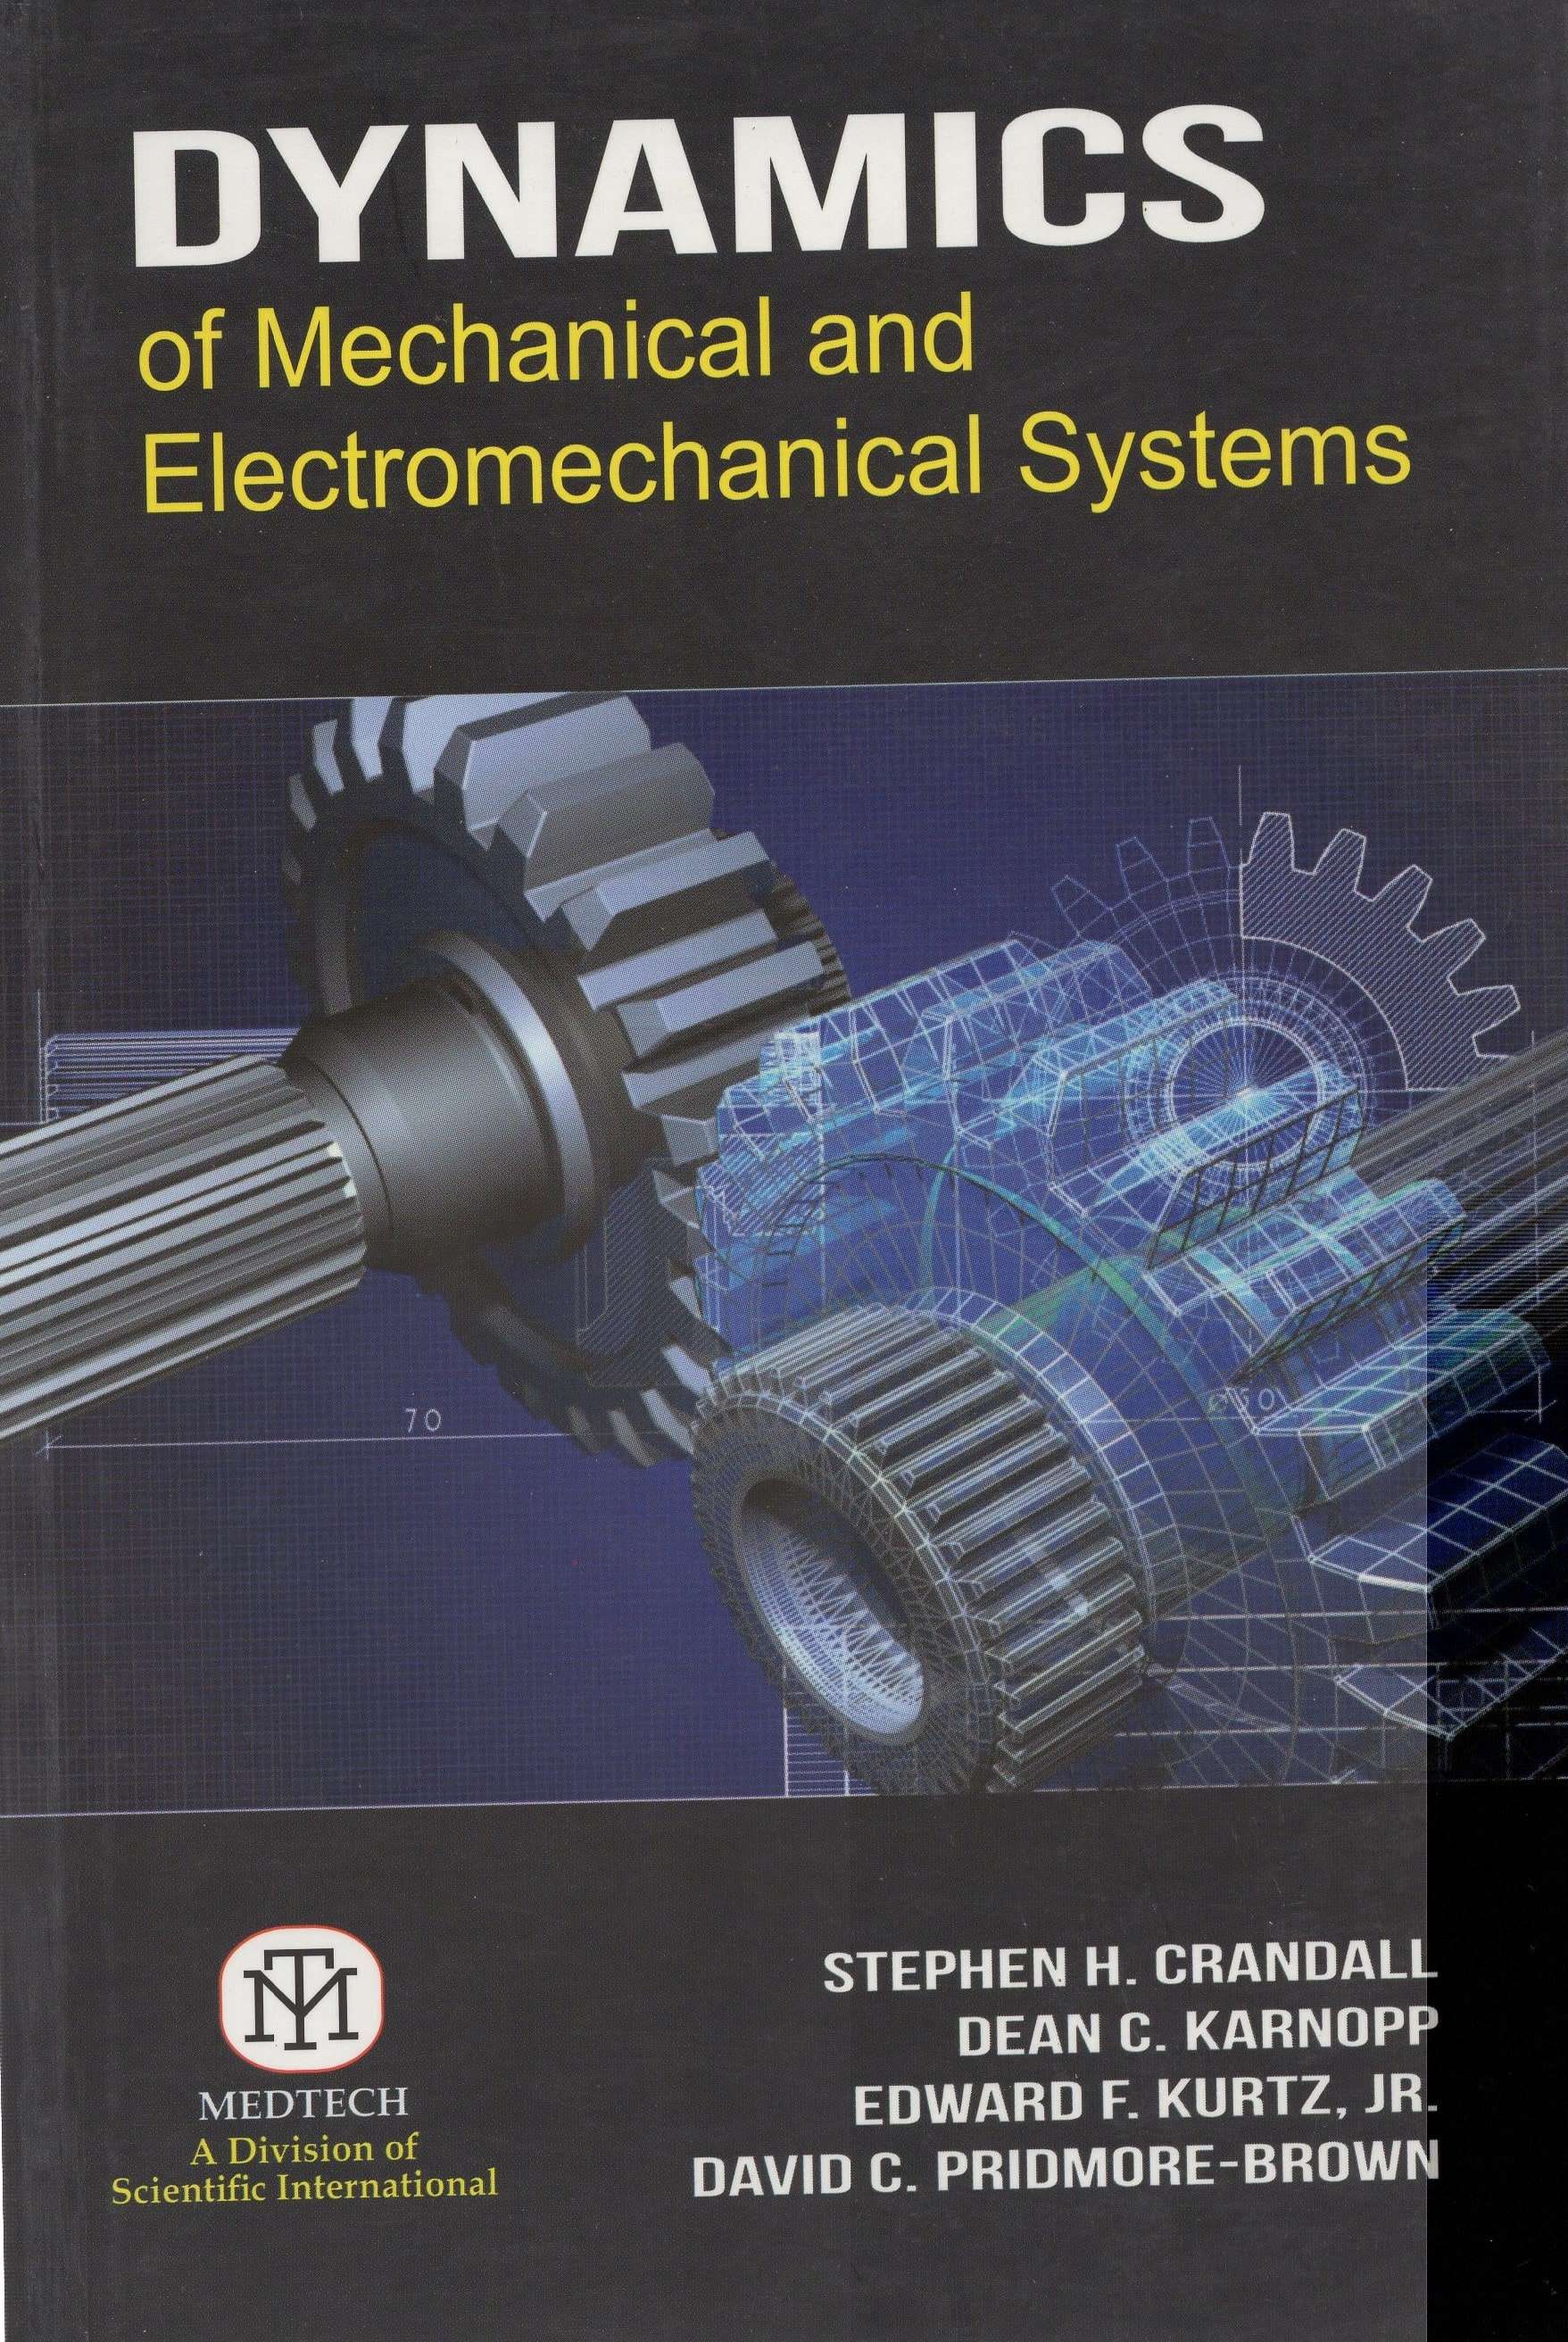 Dynamics of Mechanical and Electromechanical Systems